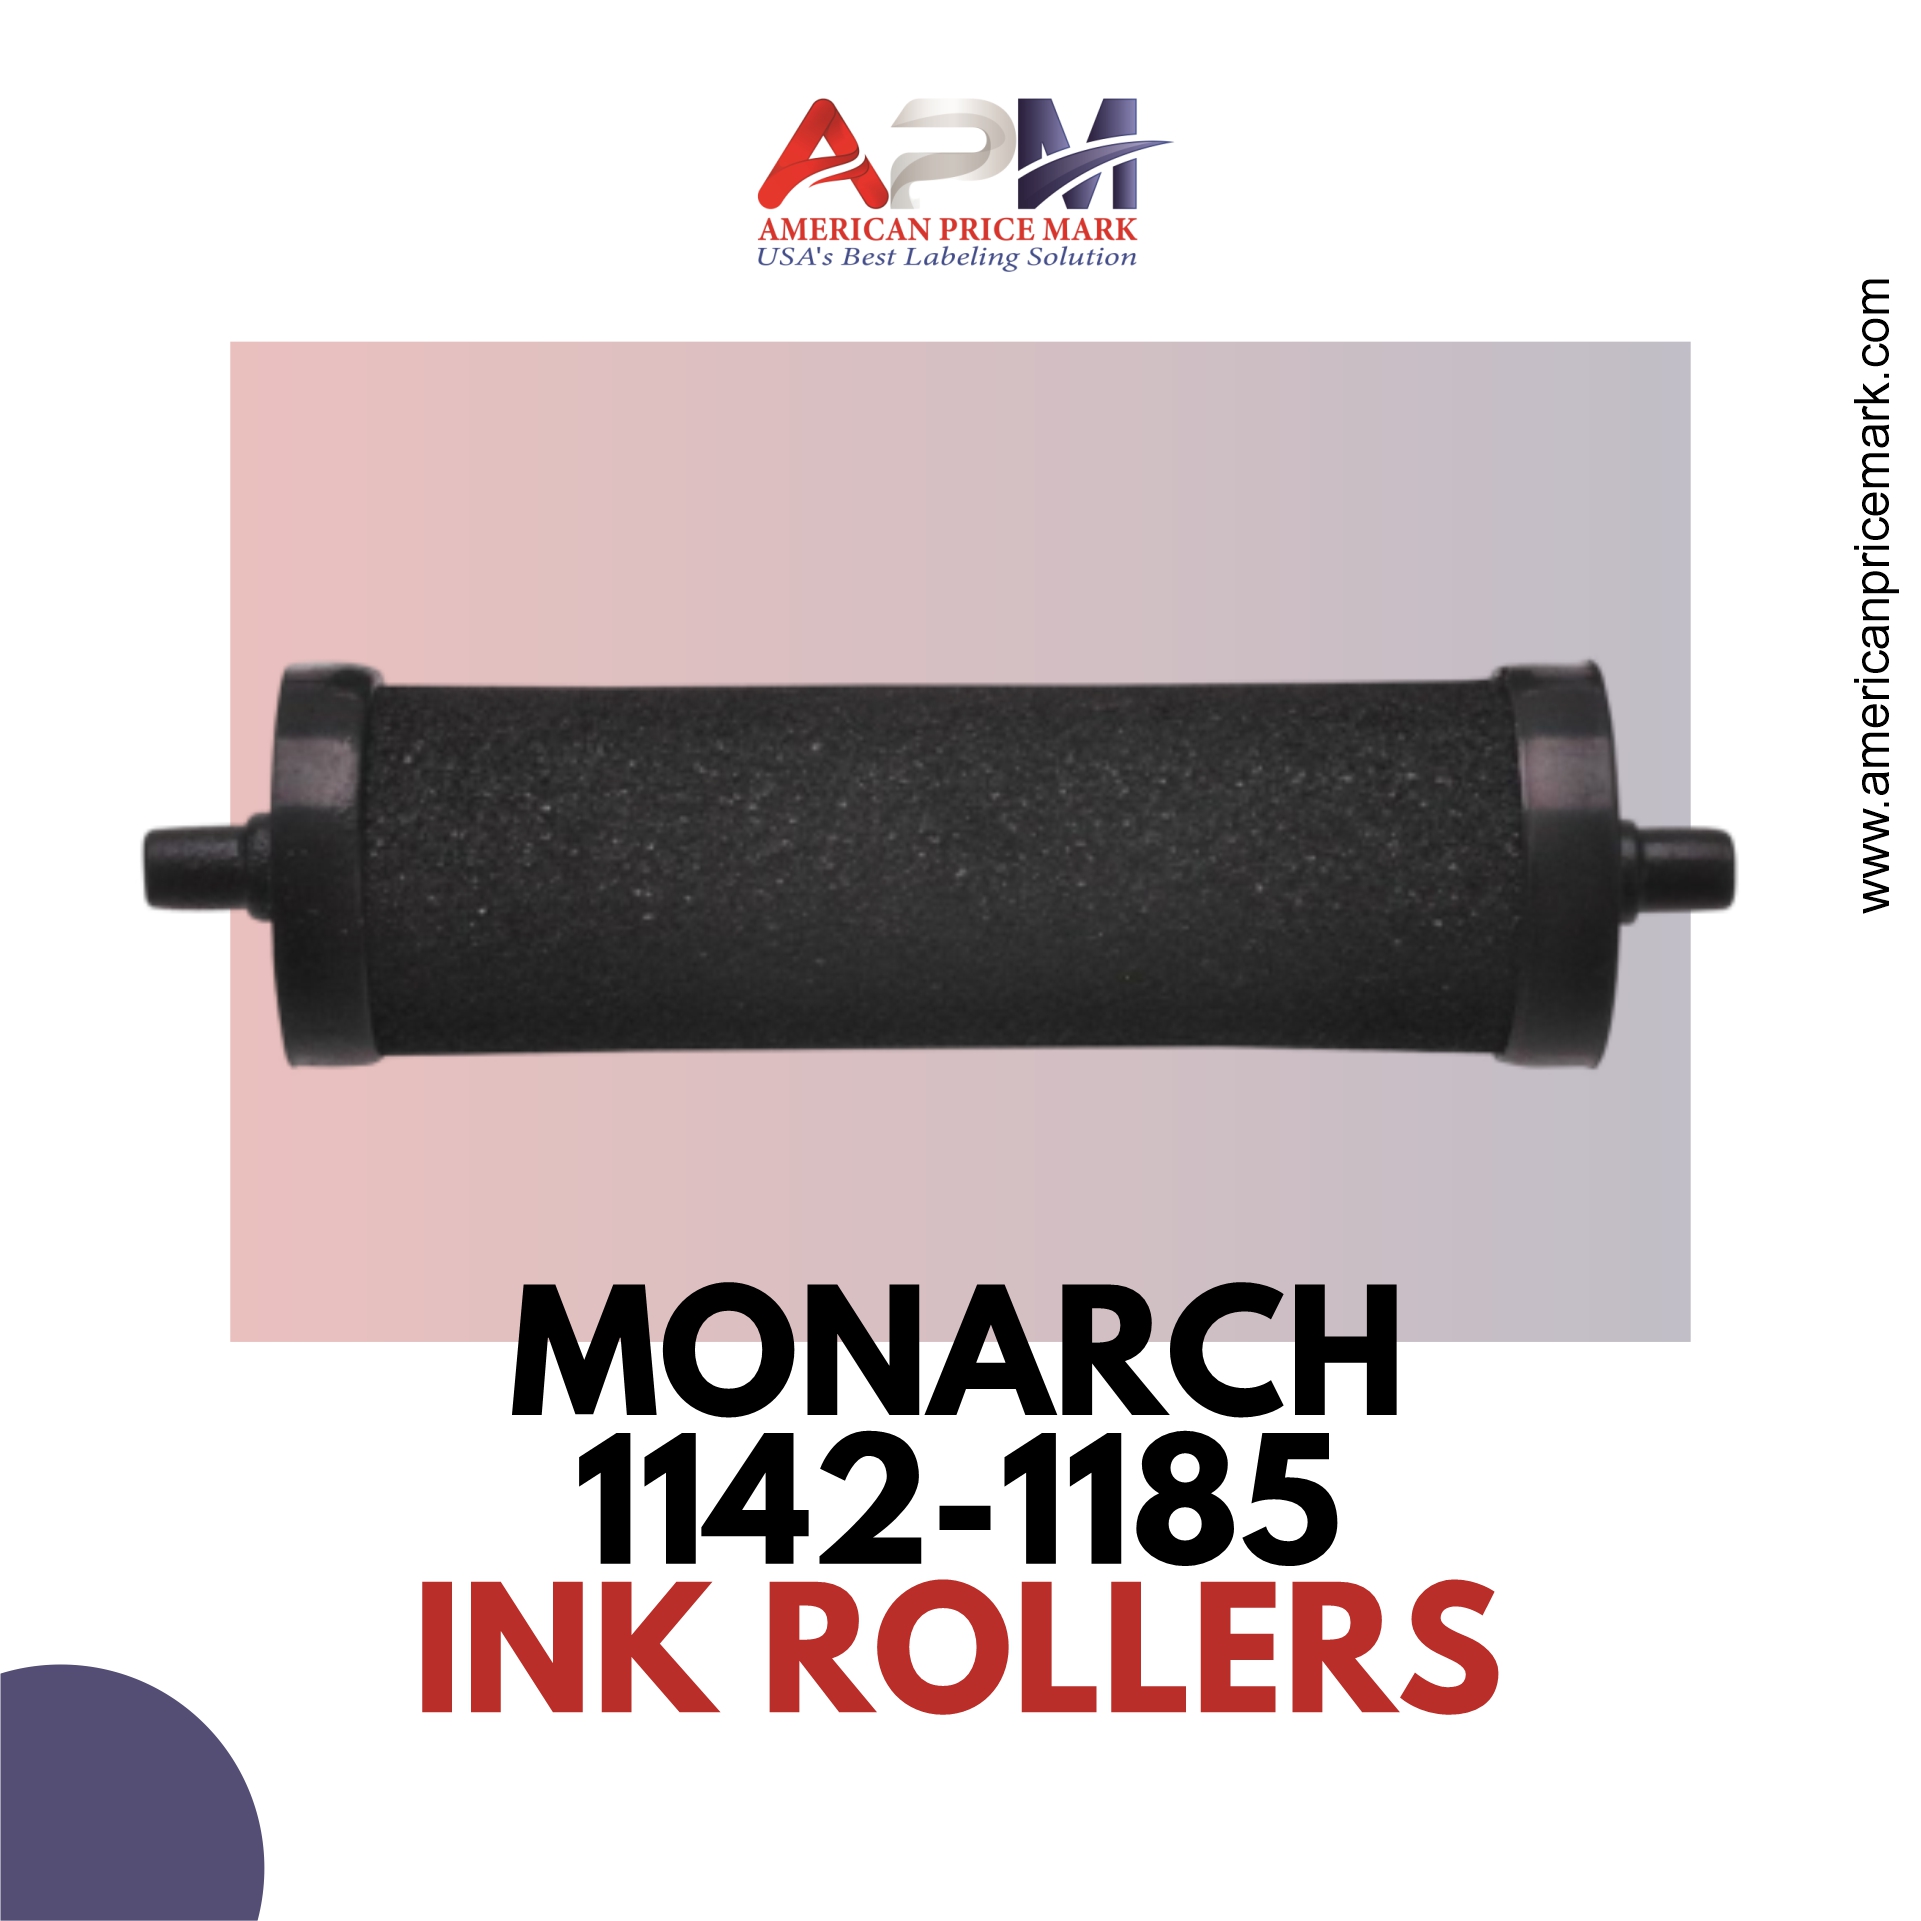 1152 1153 and 1177 Pricers 1175 6 Rolls with 1 Free Ink Roller. 1176 Yellow Pricing Labels to fit Monarch 1151